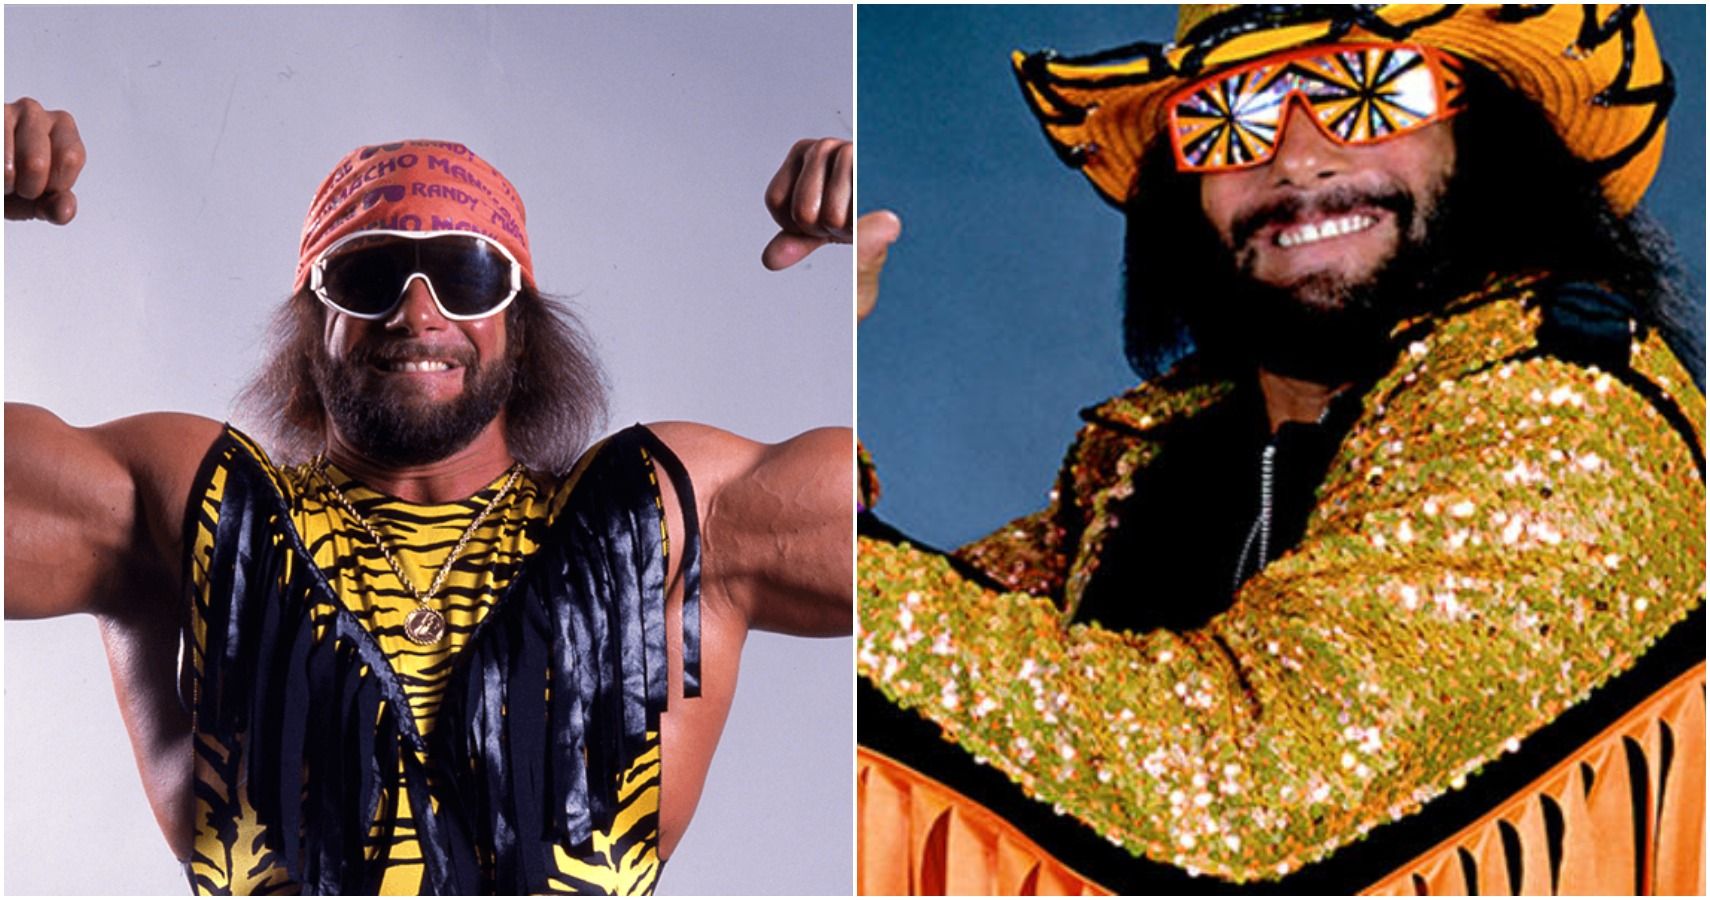 Macho Man Randy Savage: A Smaller WWE Wrestler With The Biggest Personality